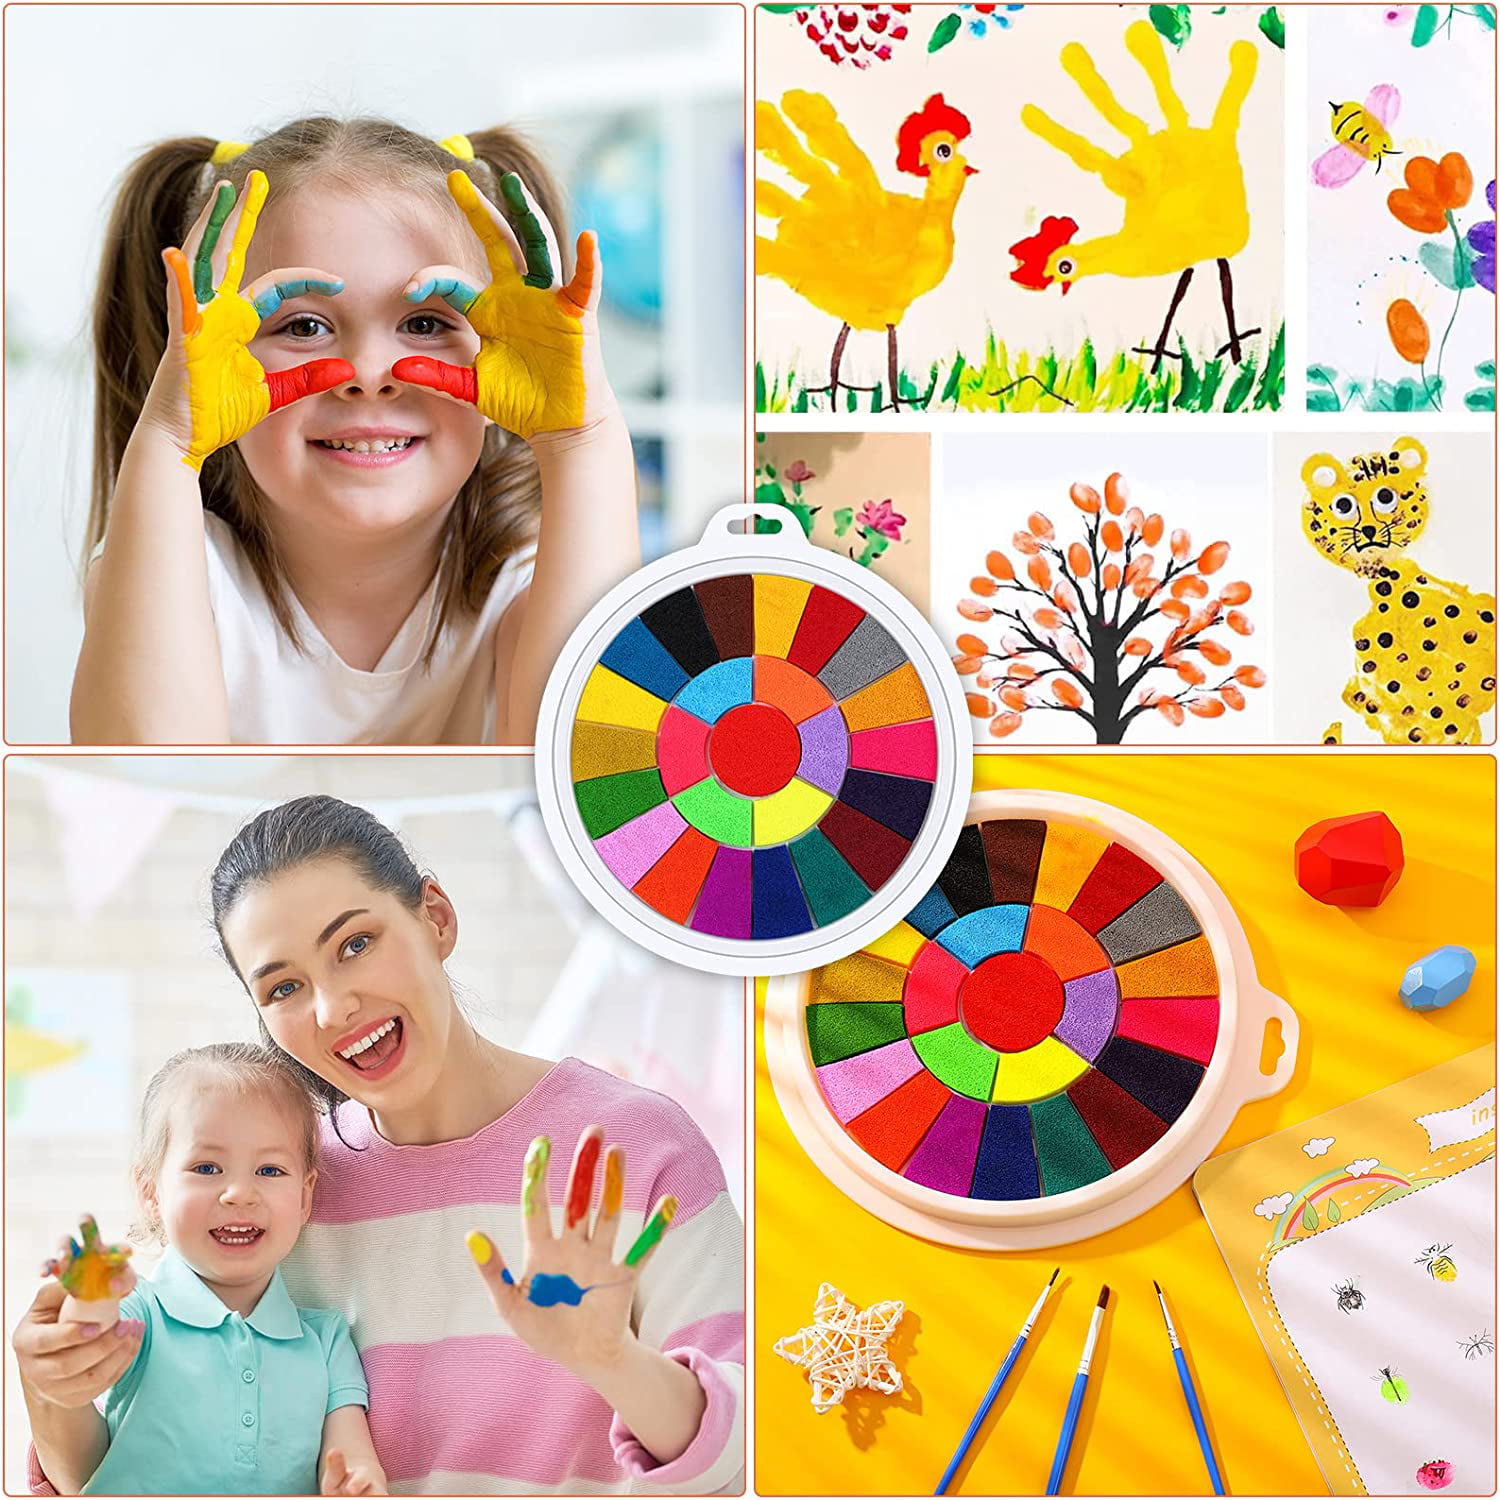 ICRPSTU Funny Finger Painting Kit for Kids, Finger Paint Washable, Washable  Finger Drawing with Finger Paint Pad, DIY Crafts Painting, School Painting